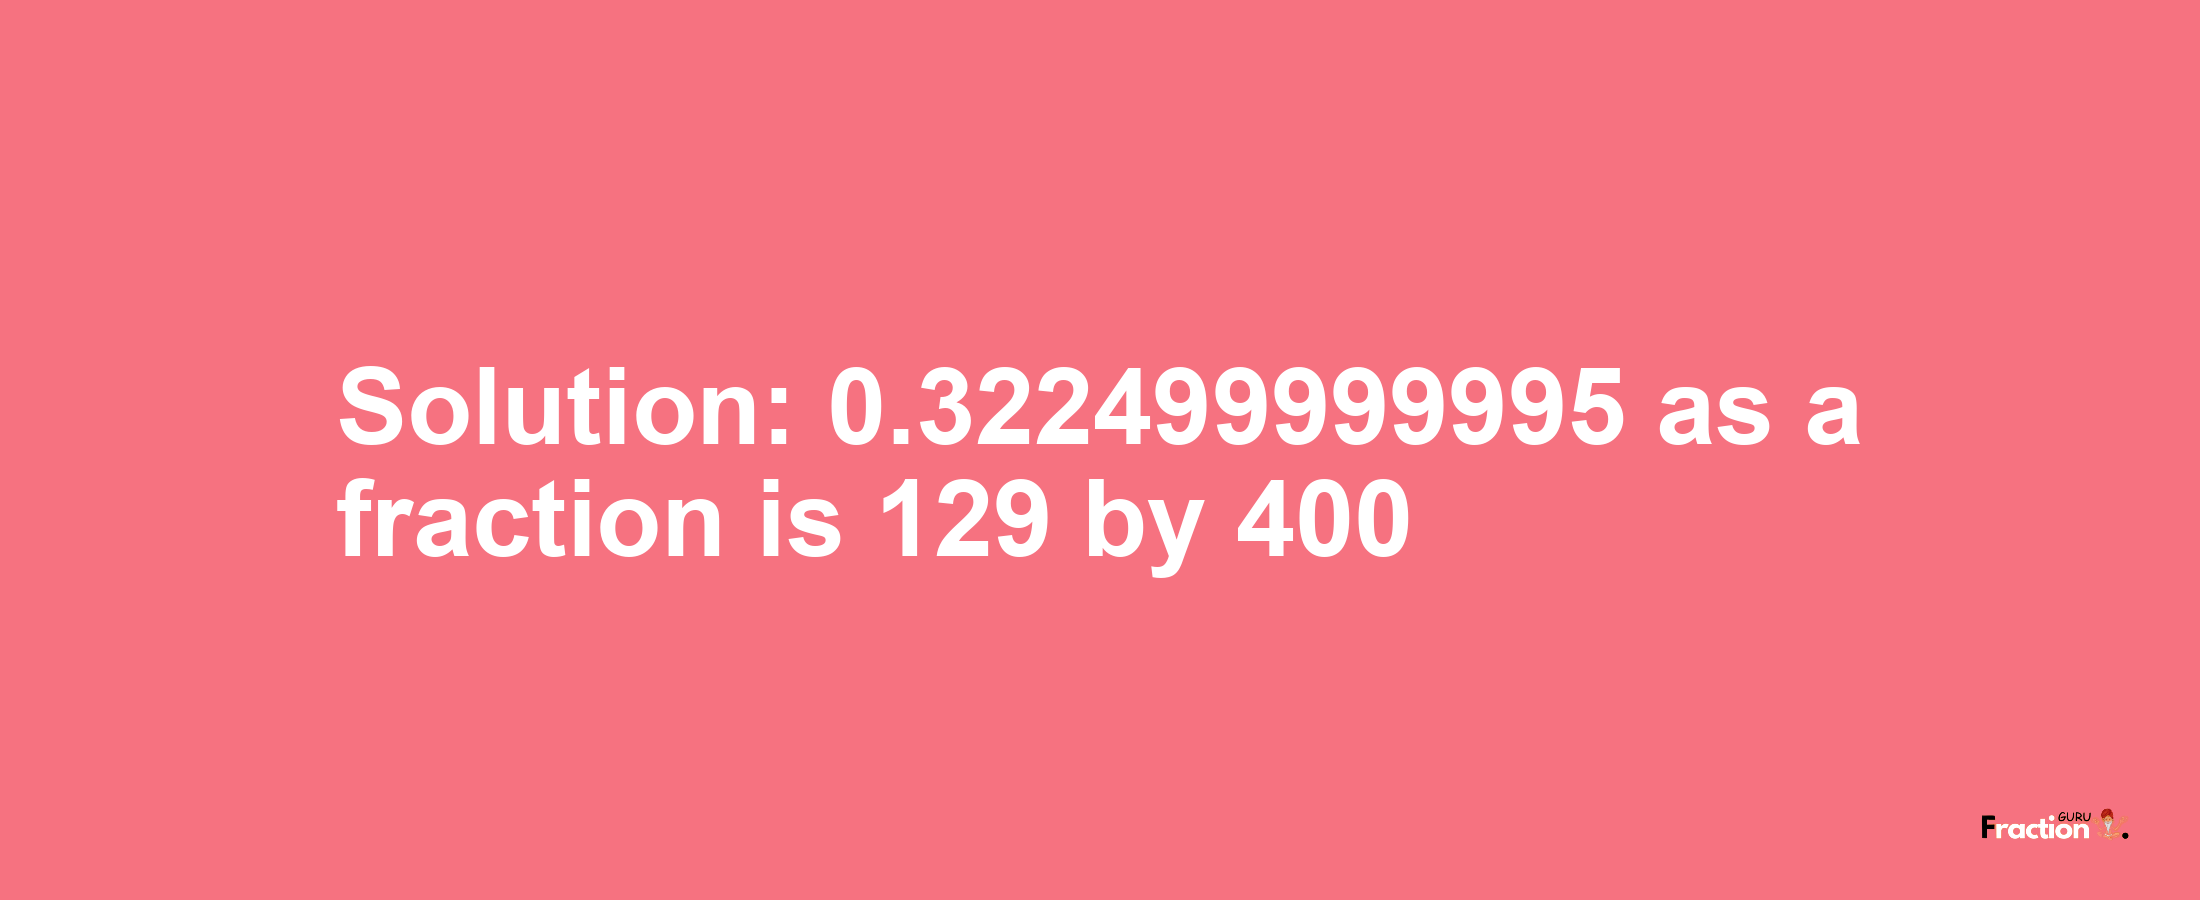 Solution:0.322499999995 as a fraction is 129/400